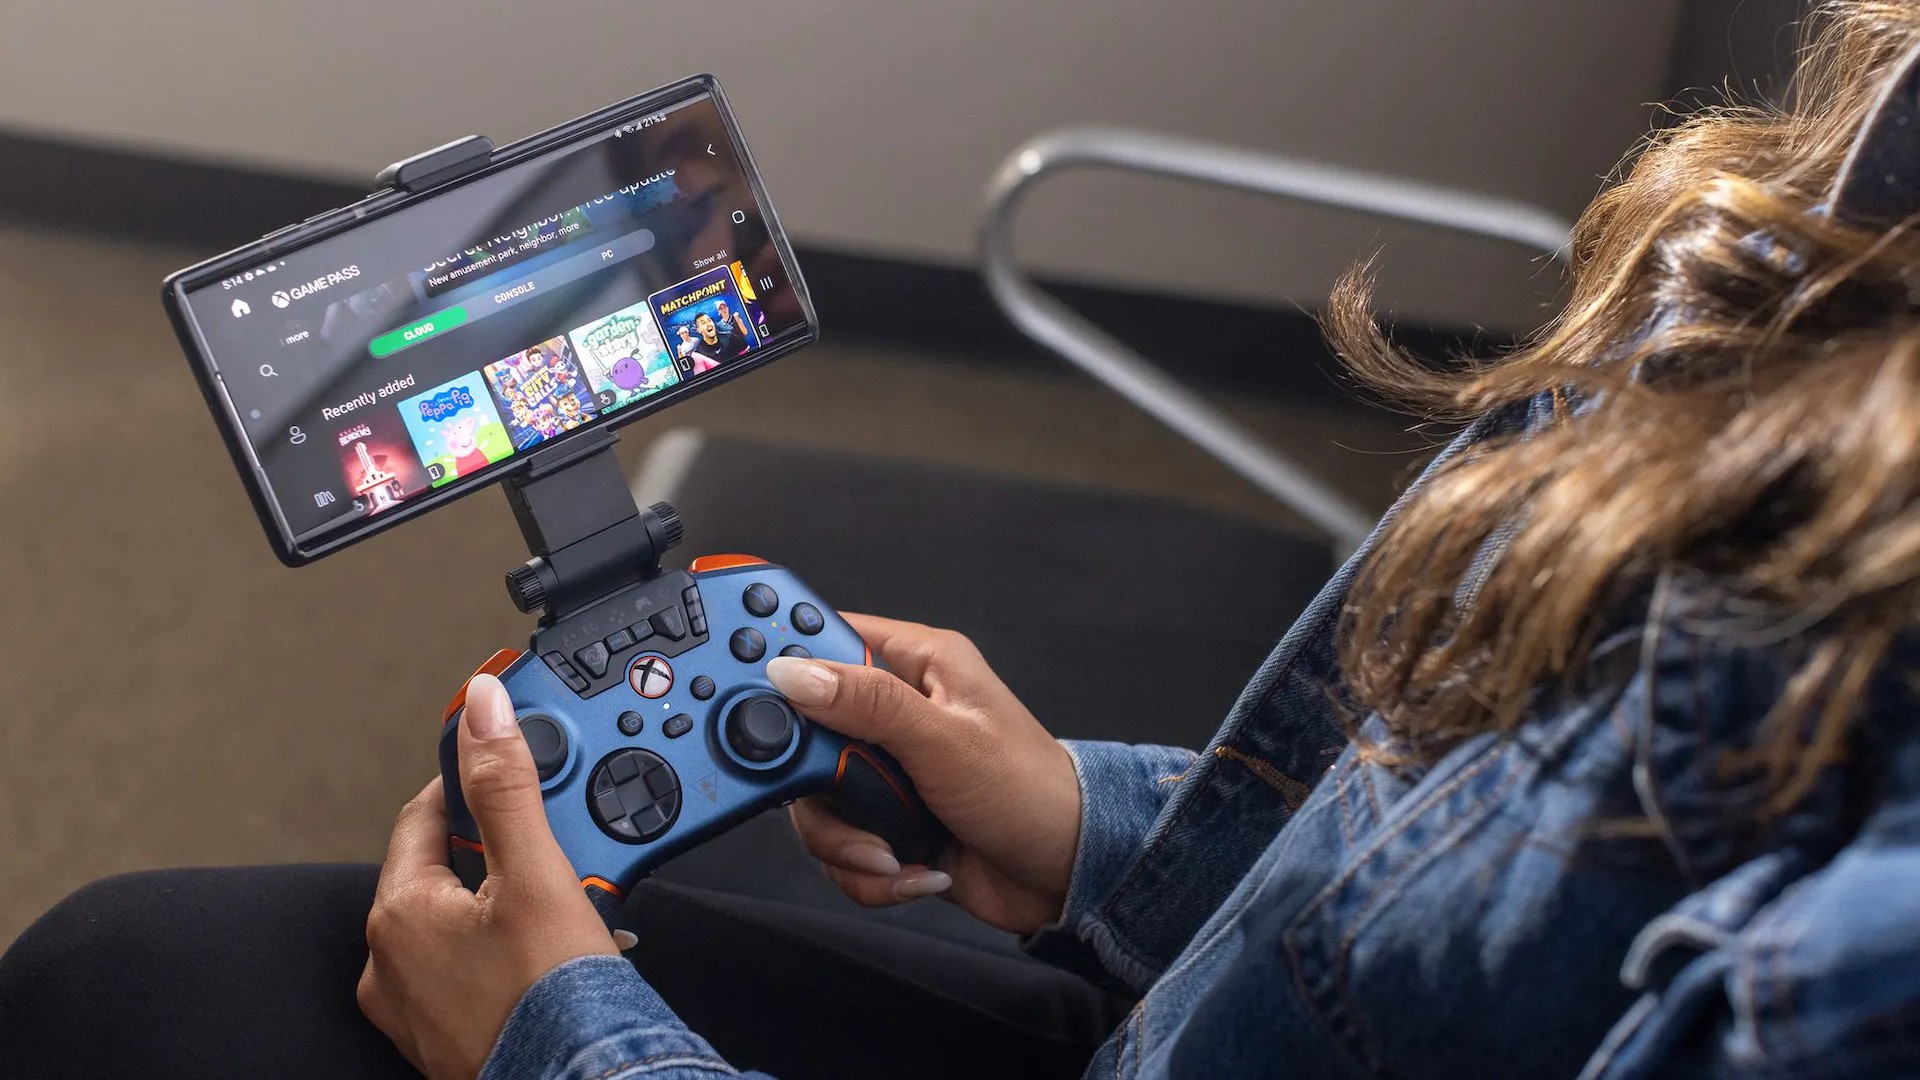 Turtle Beach launches controller focused on game streaming for Xbox and mobile